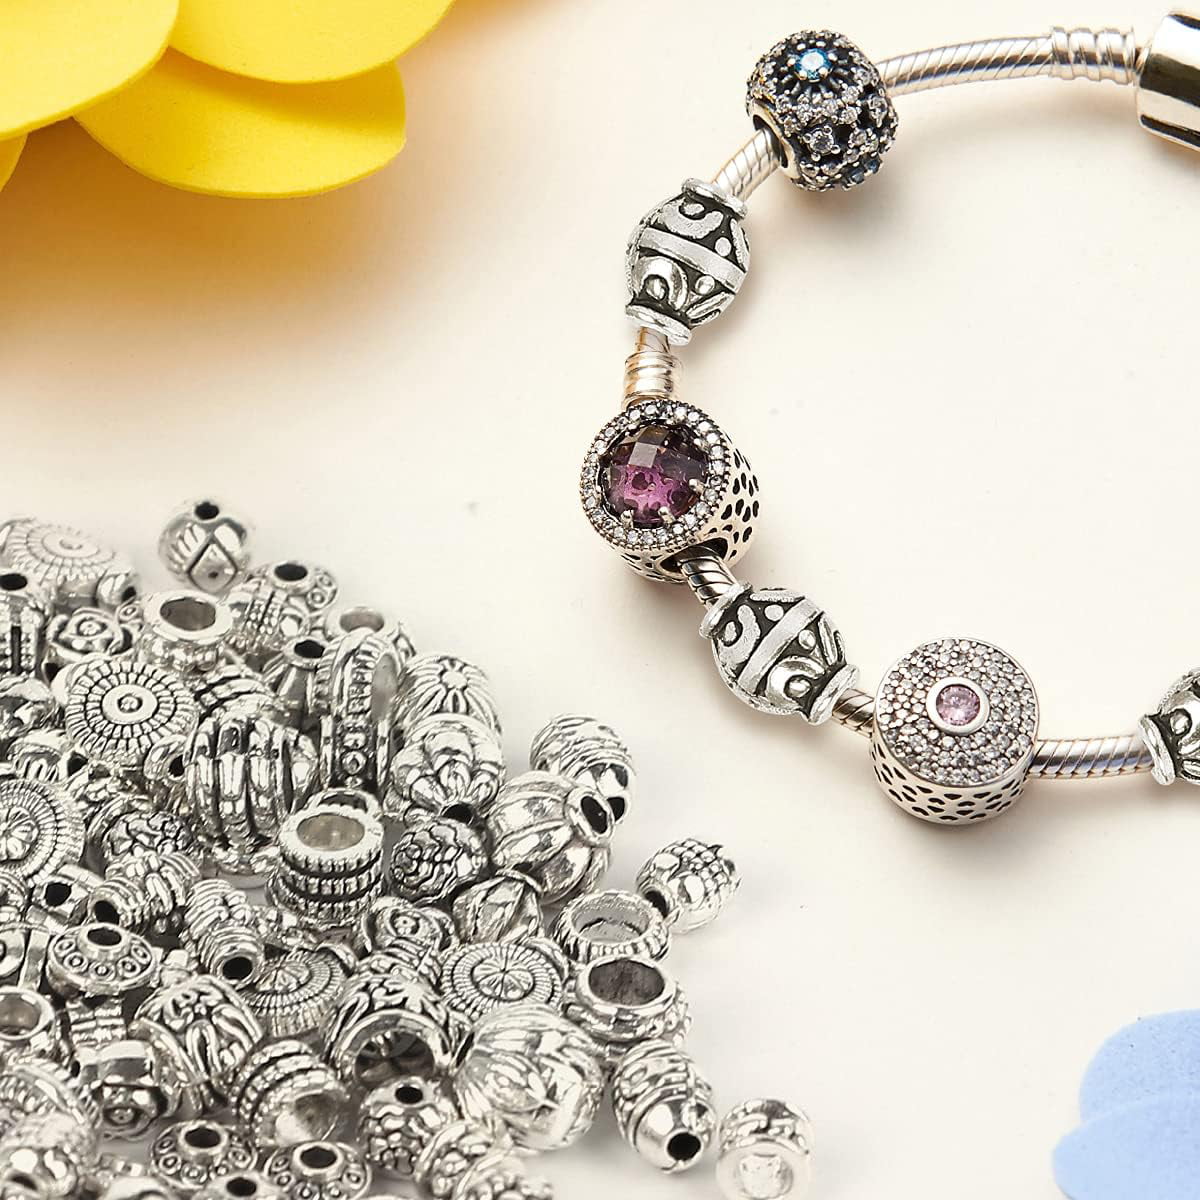 Pandora - Spacers are a beautiful way to fill up empty spaces between your  charms, add some extra sparkle and to create balance for your bracelet.  Which spacer would you love to